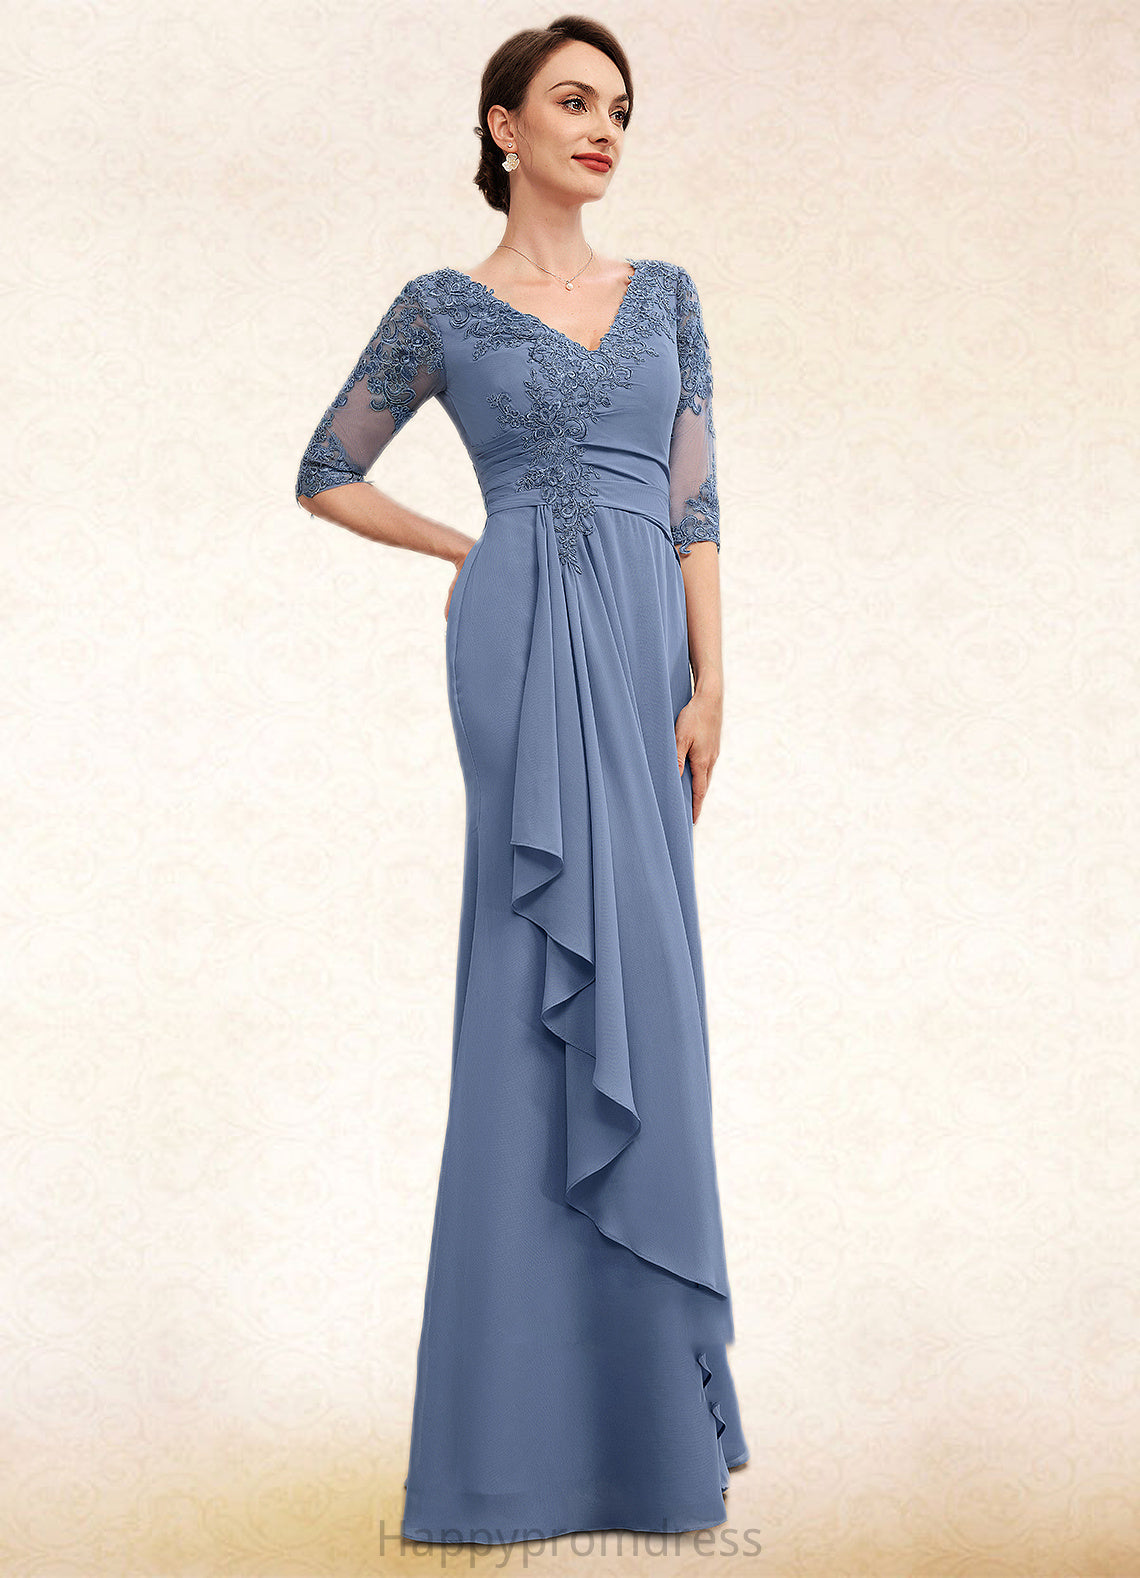 Aaliyah A-Line V-neck Floor-Length Chiffon Lace Mother of the Bride Dress With Cascading Ruffles XXS126P0014609